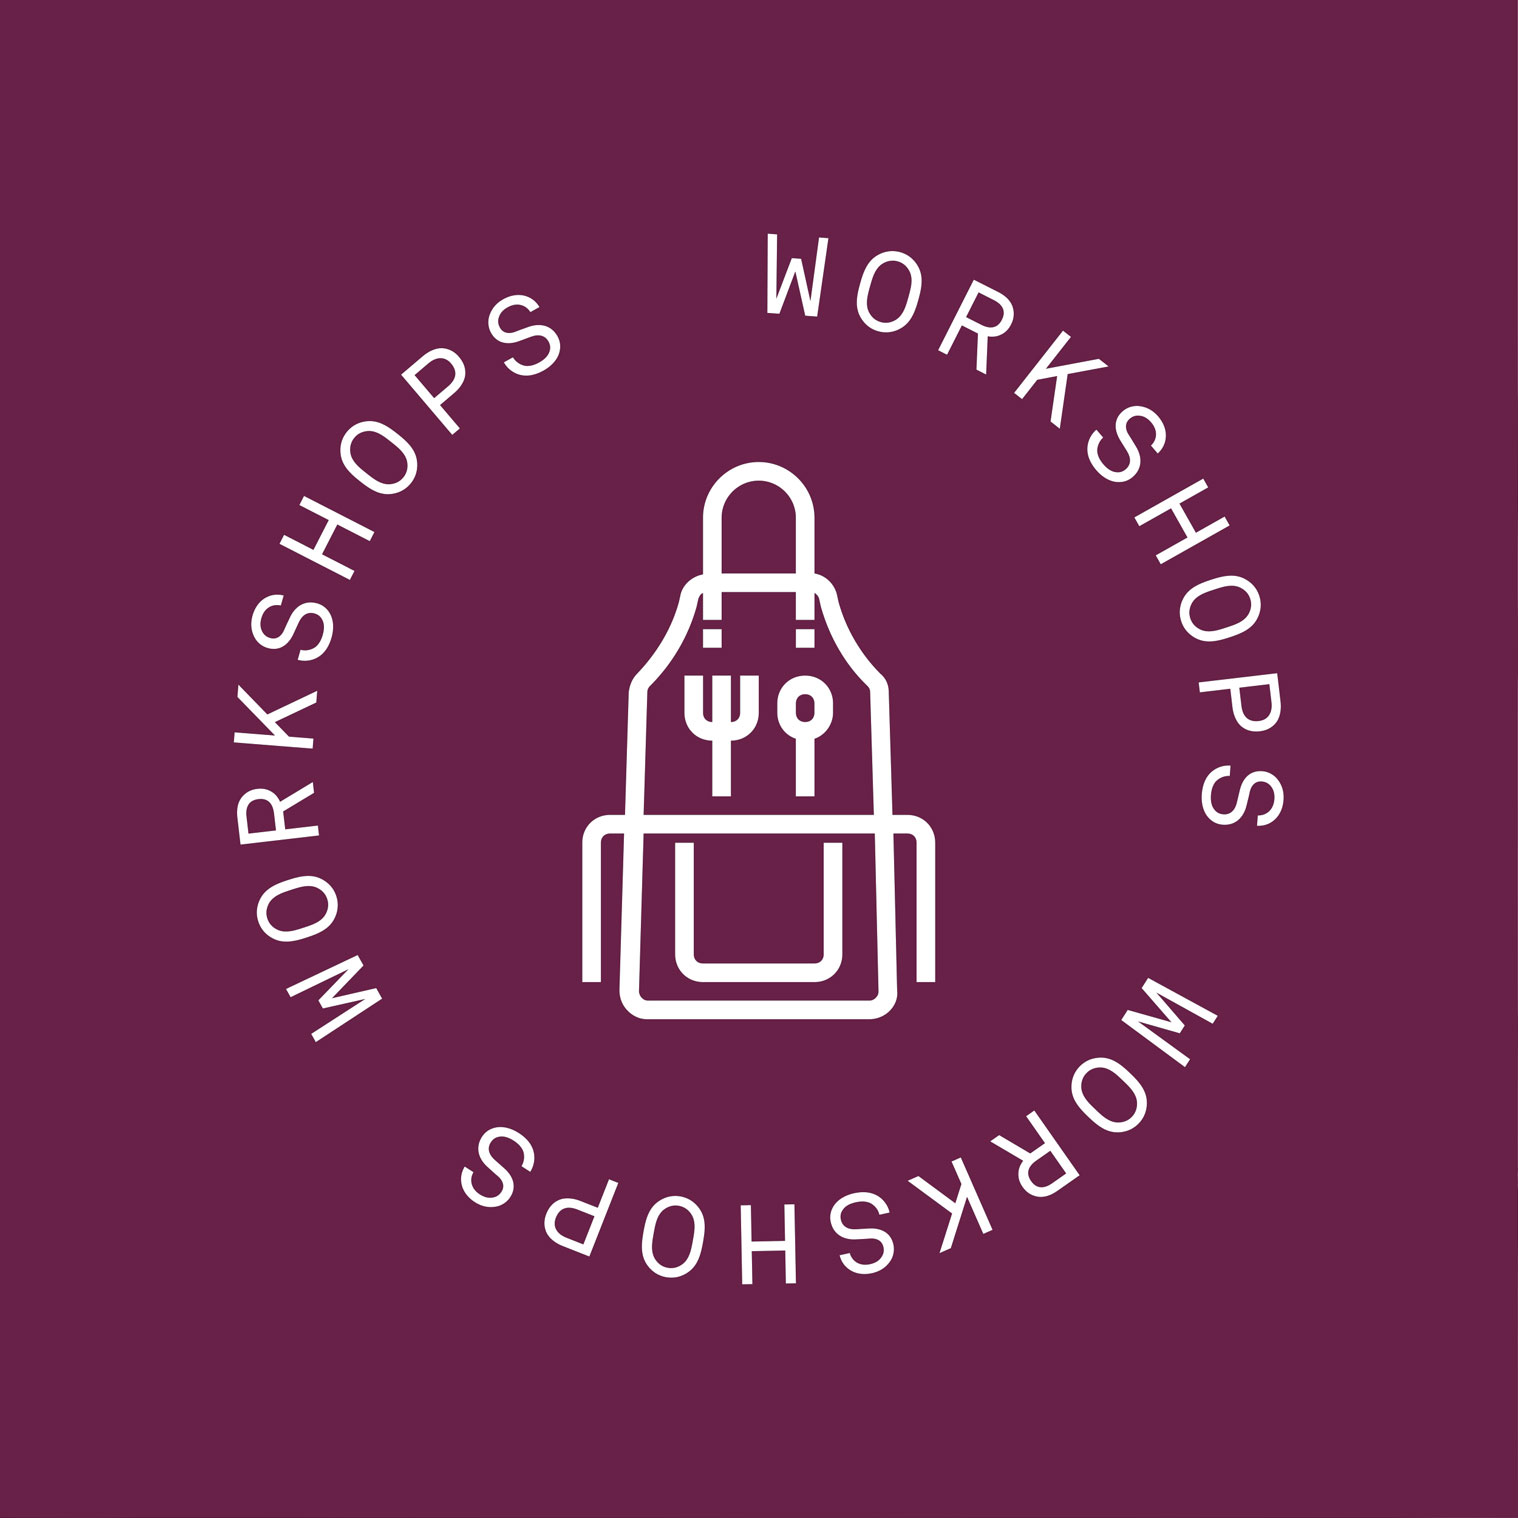 Close up of the worshops icon which has a styalised apron motive and Workshops text in a circle around it